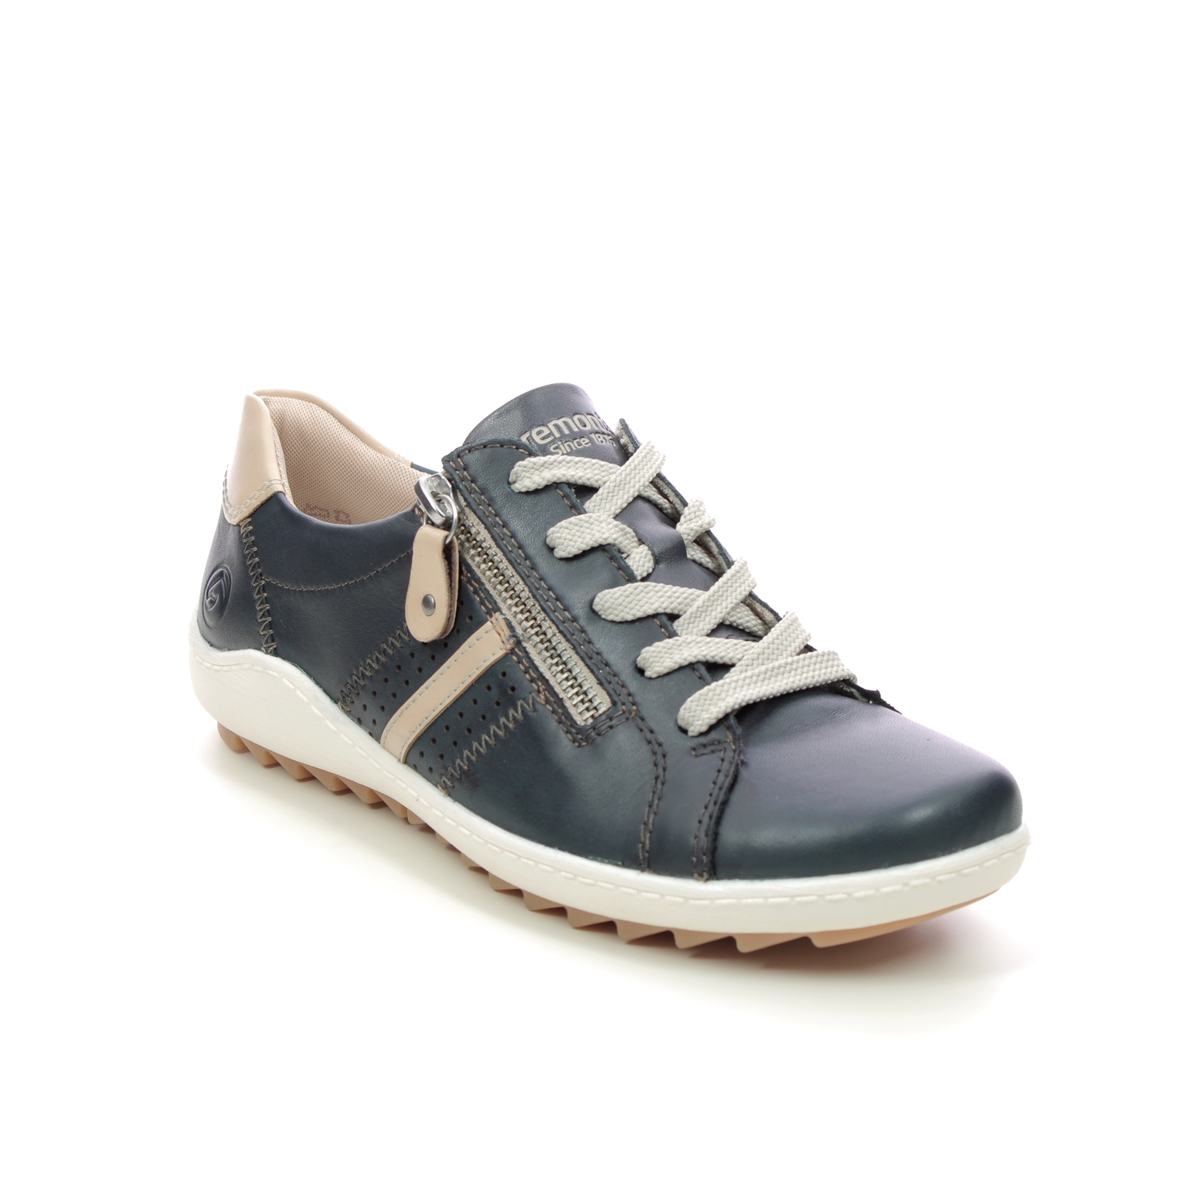 Remonte Zigzip 1 Navy Leather Womens Lacing Shoes R1432-14 In Size 37 In Plain Navy Leather